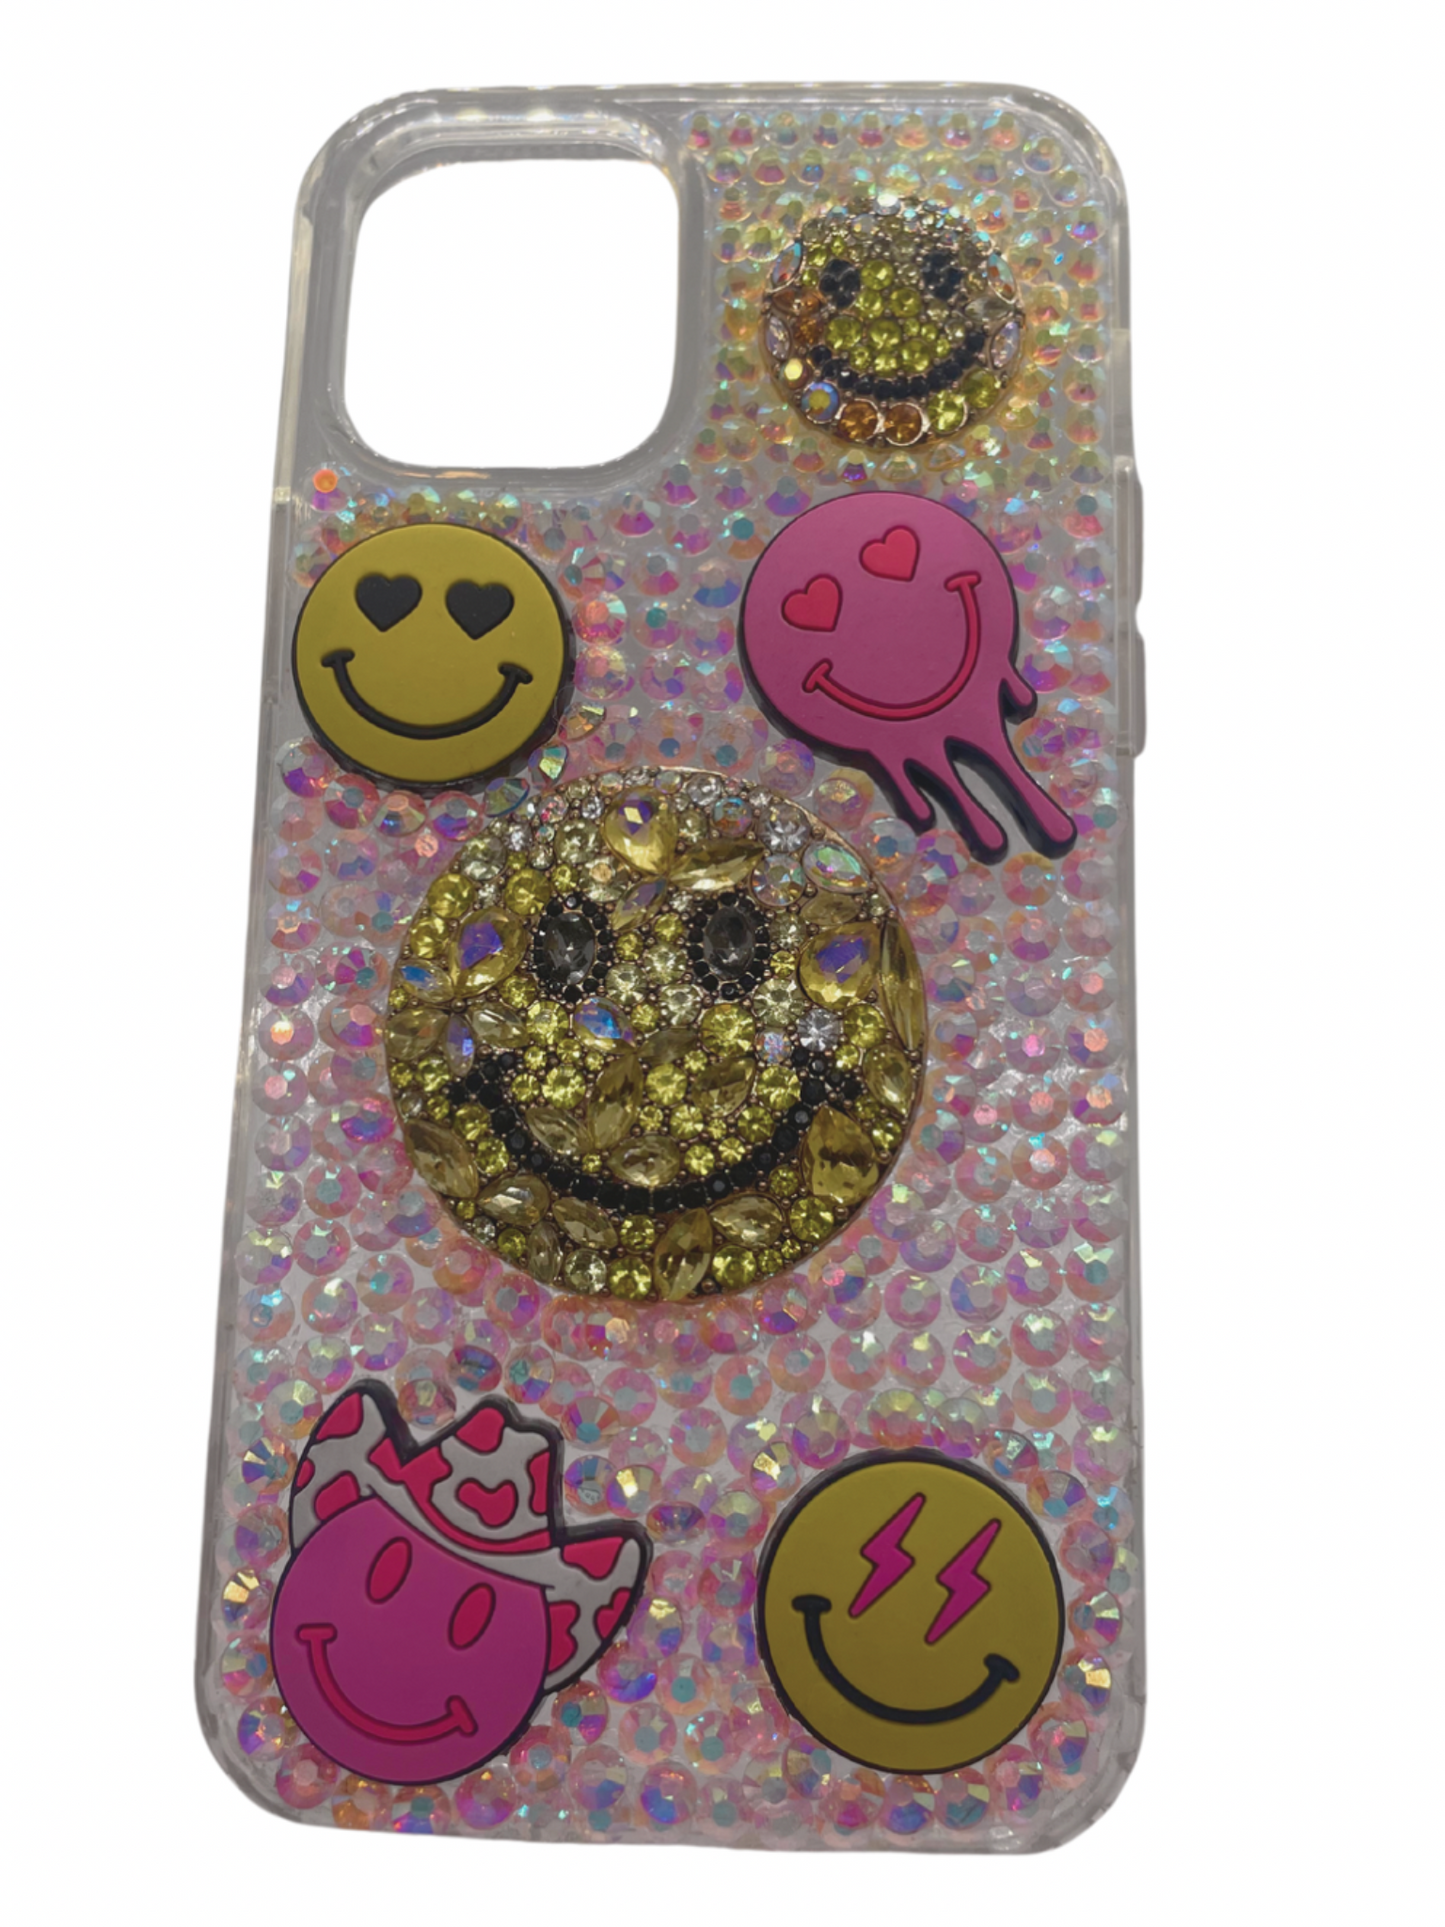 iPHONE ACRYLIC CASE ( Handcrafted Charms & Rhinestone Cases )